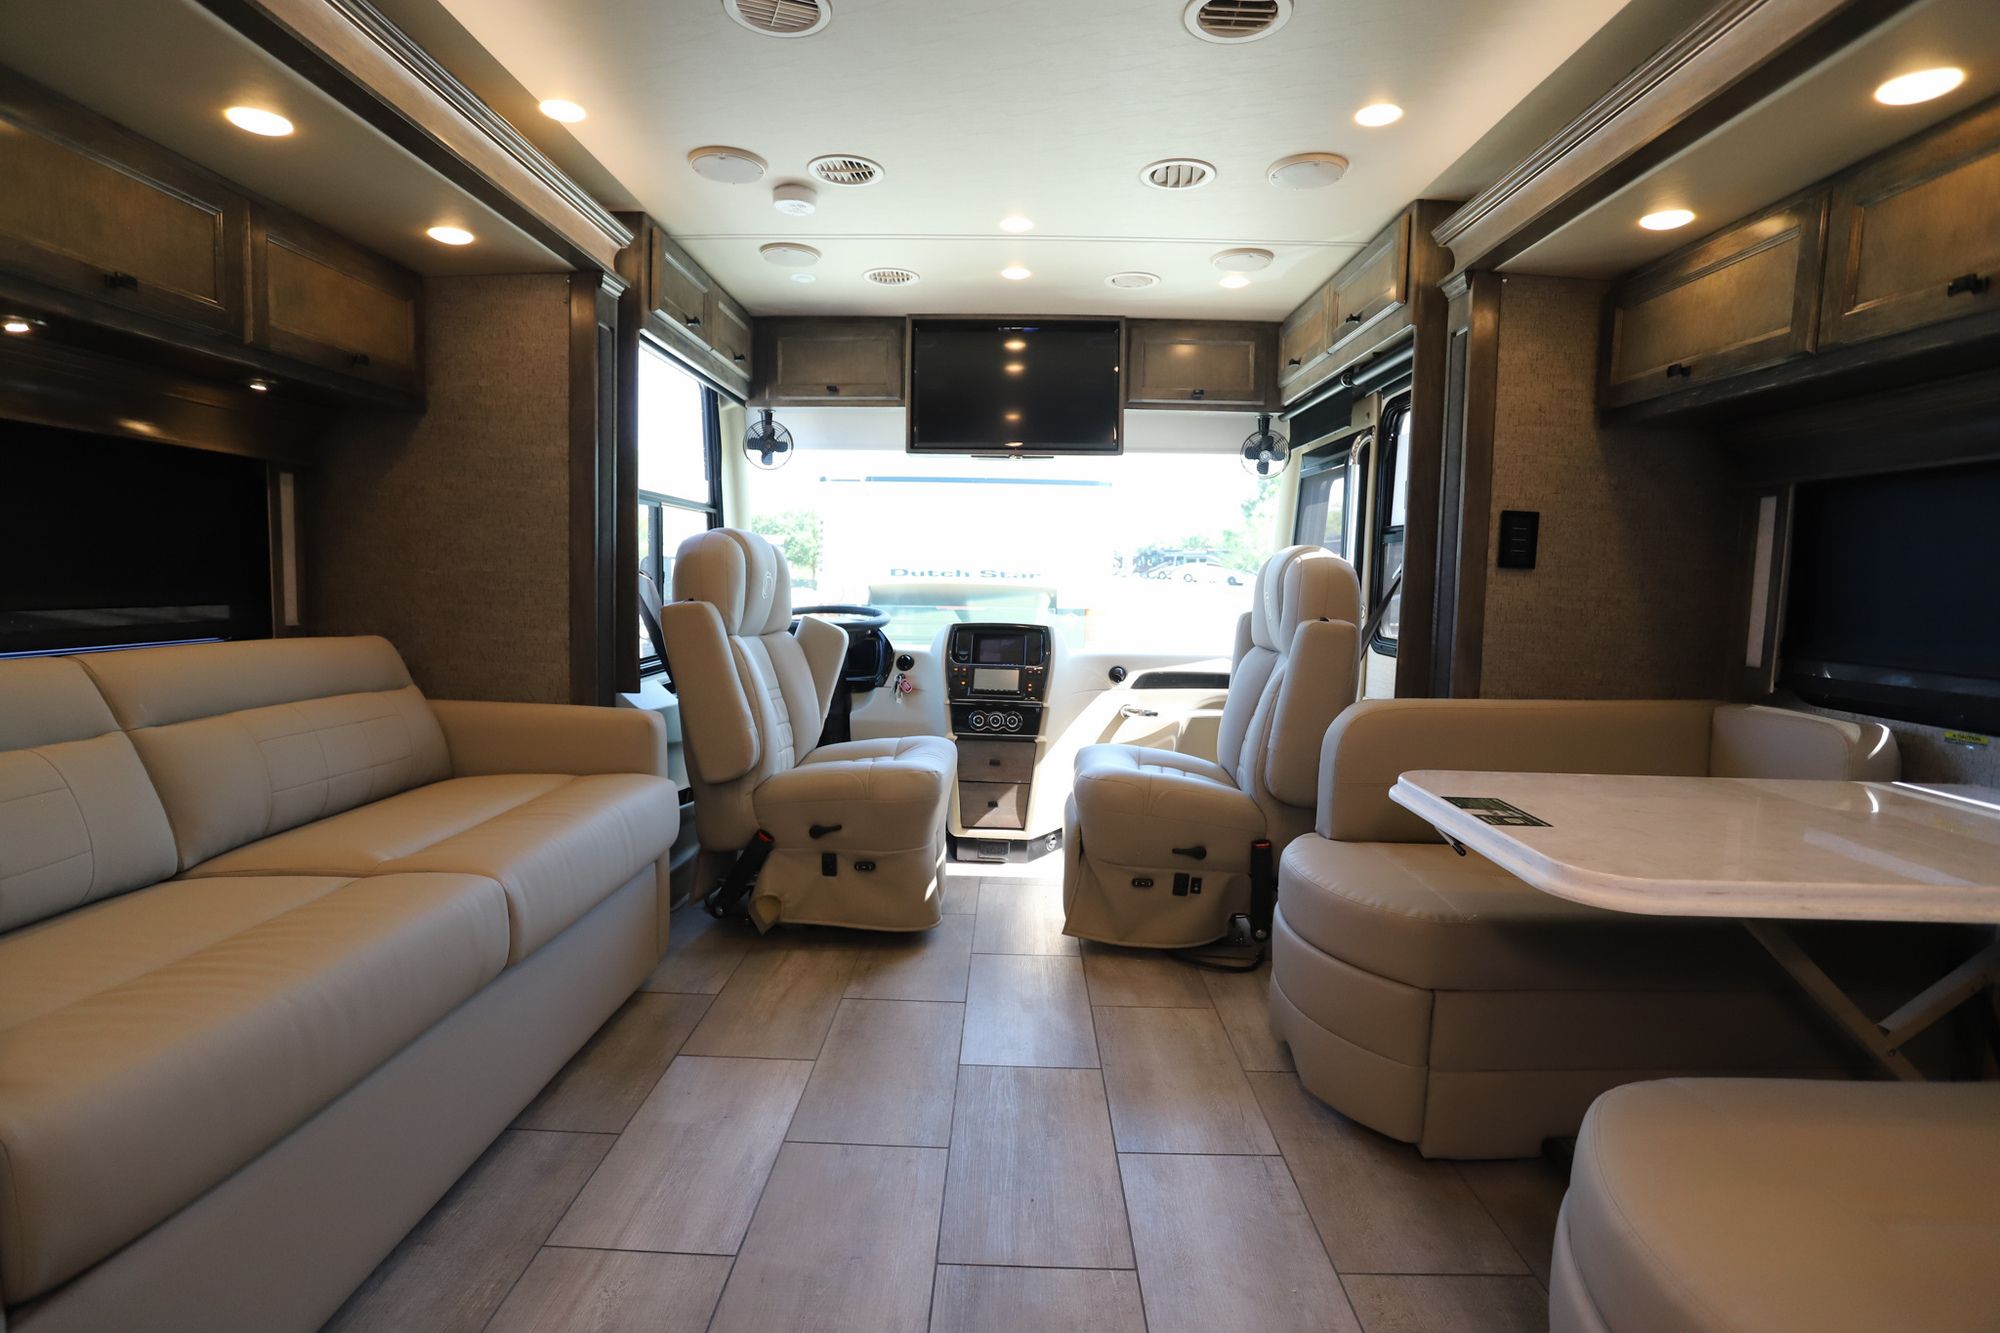 New 2022 Tiffin Motor Homes Breeze 33BR Class A  For Sale